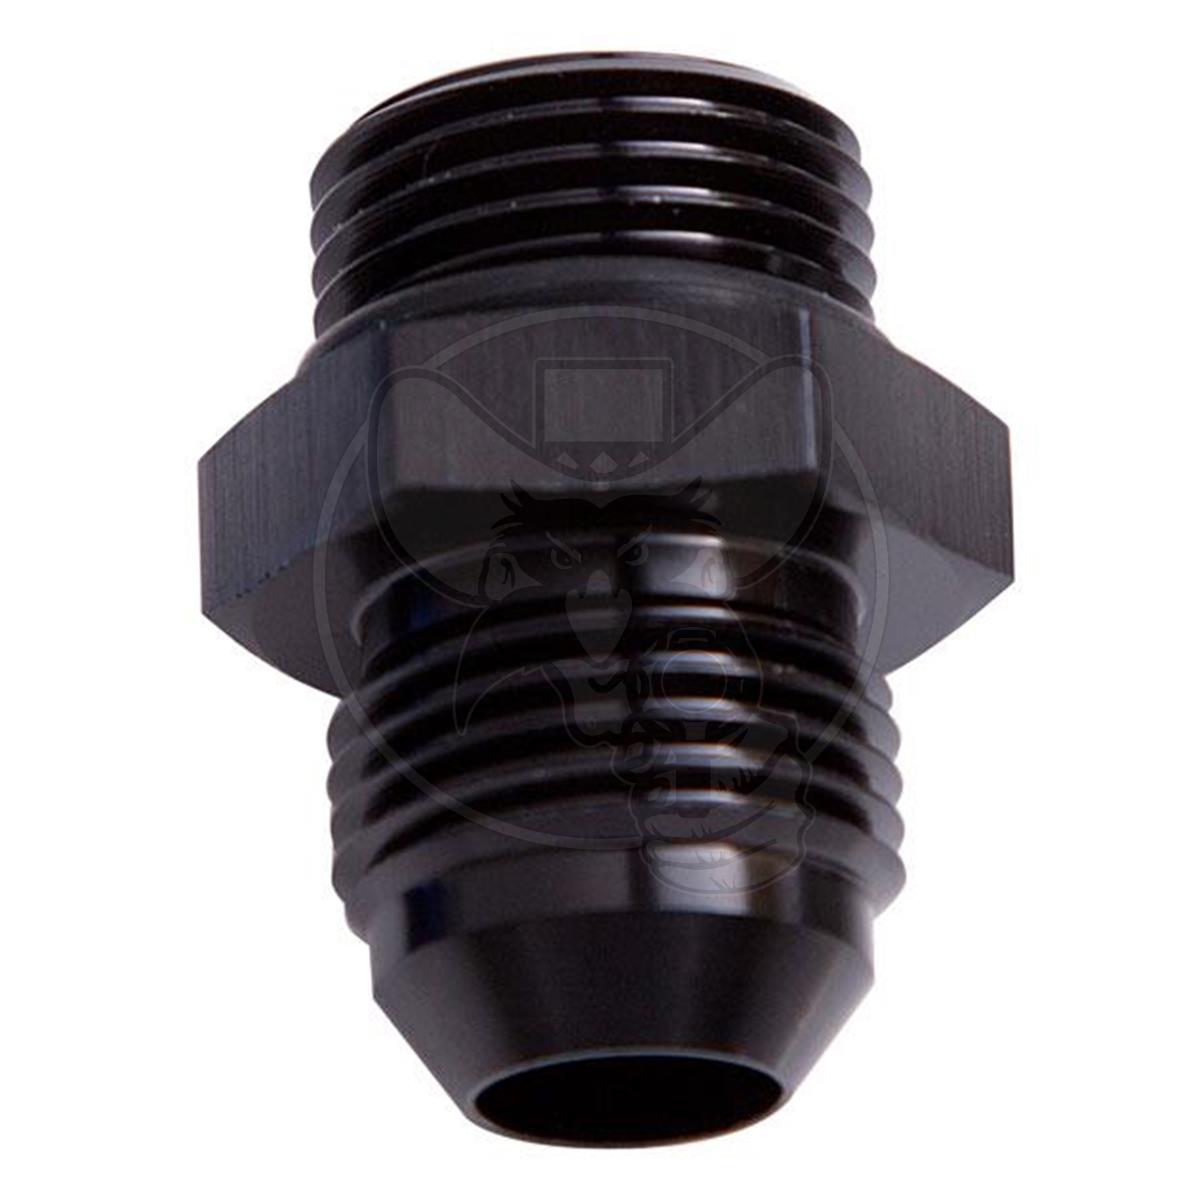 Aeroflow -6 ORB to -6AN Straight Male Flare Adapter - Black